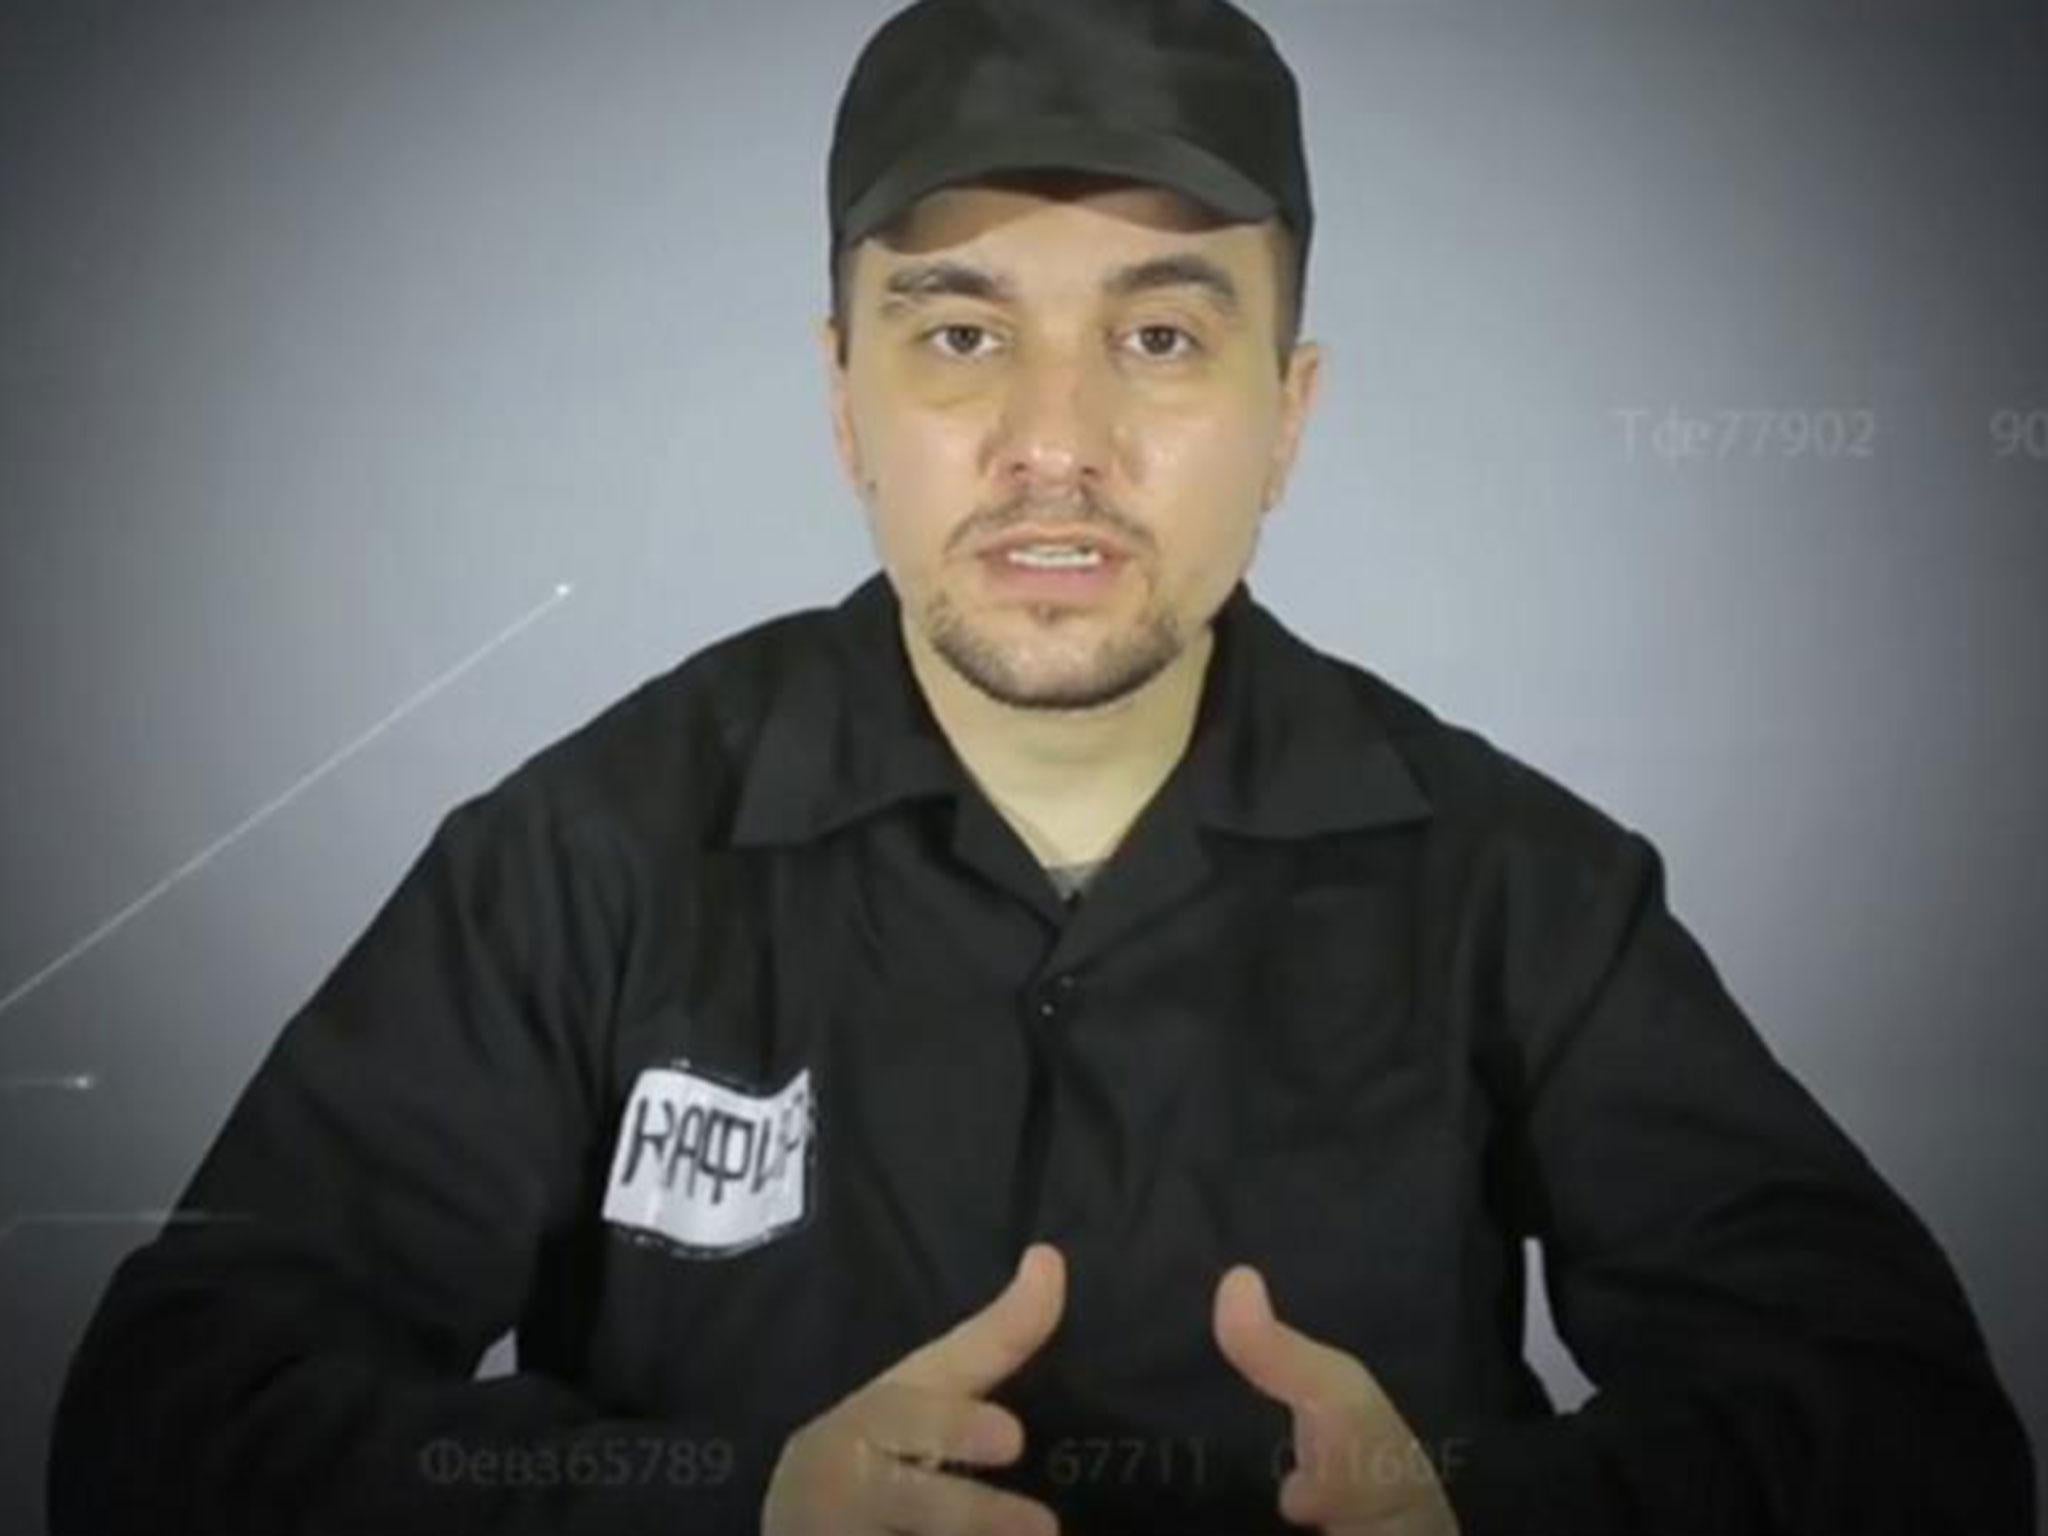 Isis named Petrenko as an (FSB) colonel in a previous propaganda video, threatening to execute the prisoner in a 'message to the president of Russia'